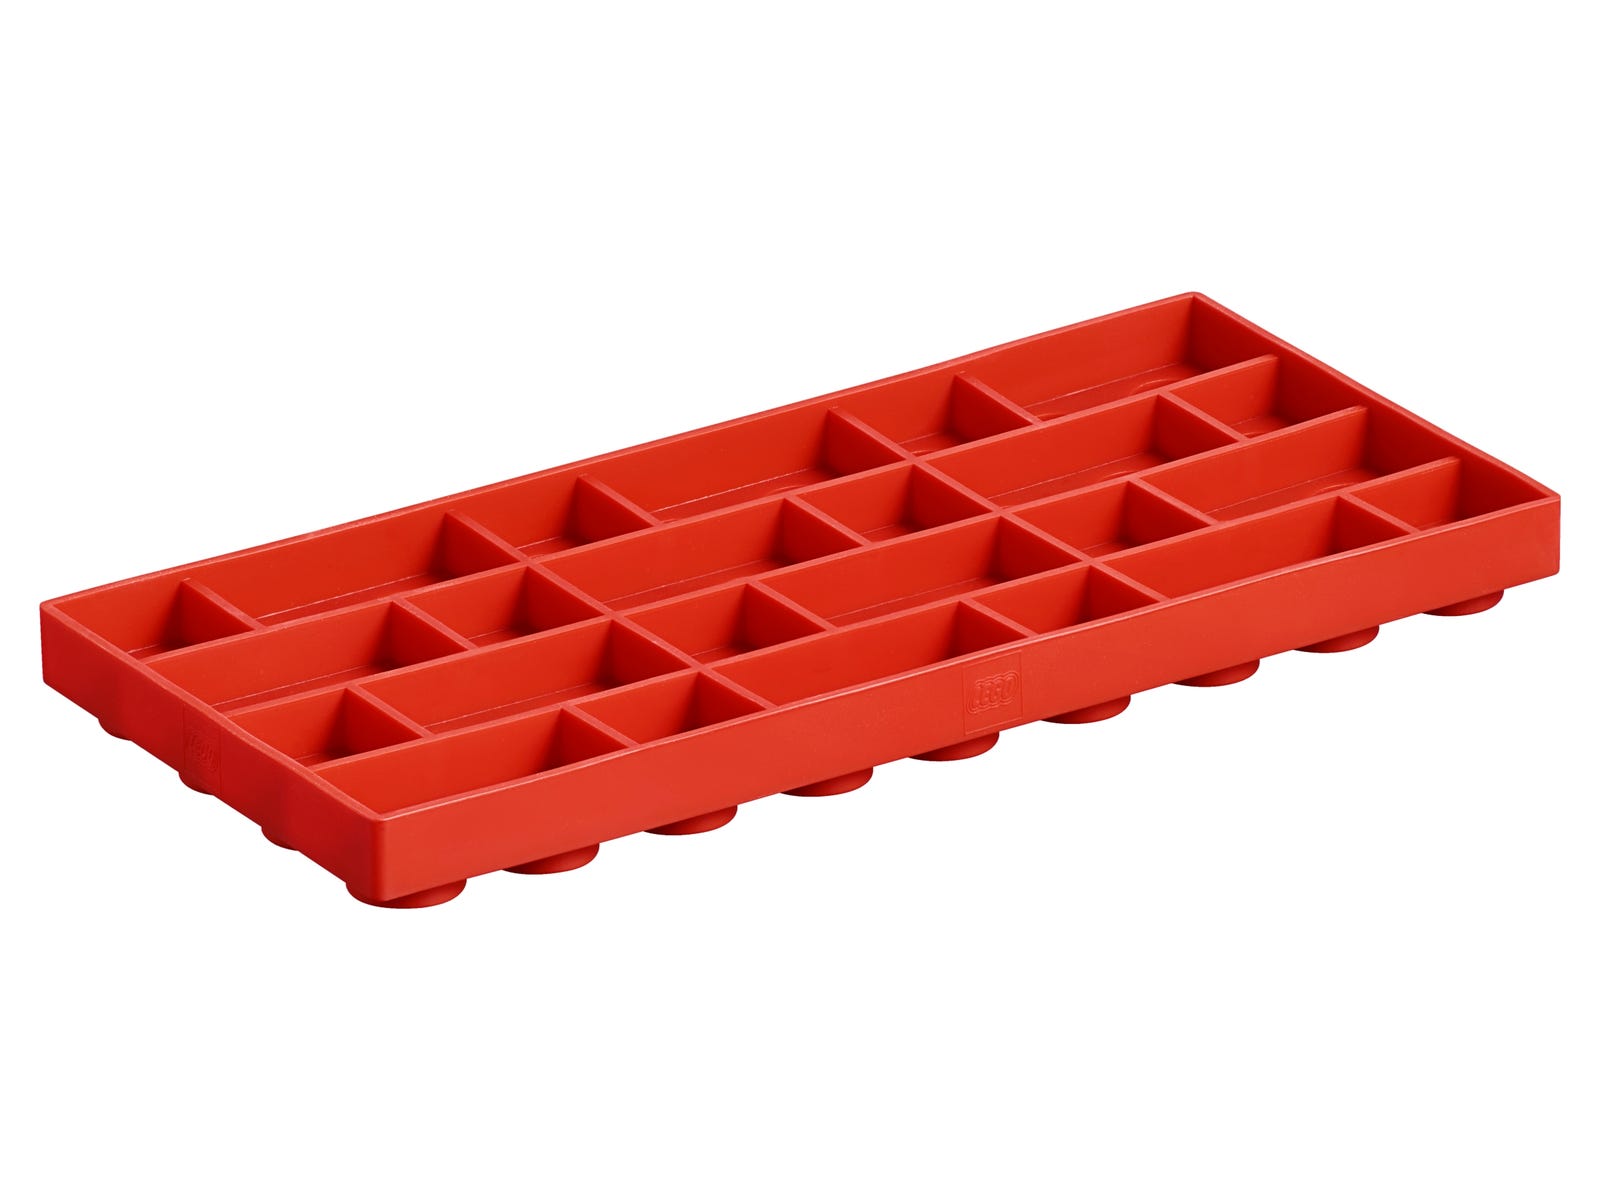 Lego Brick Ice Cube Tray Miscellaneous Buy Online At The Official Lego Shop Us